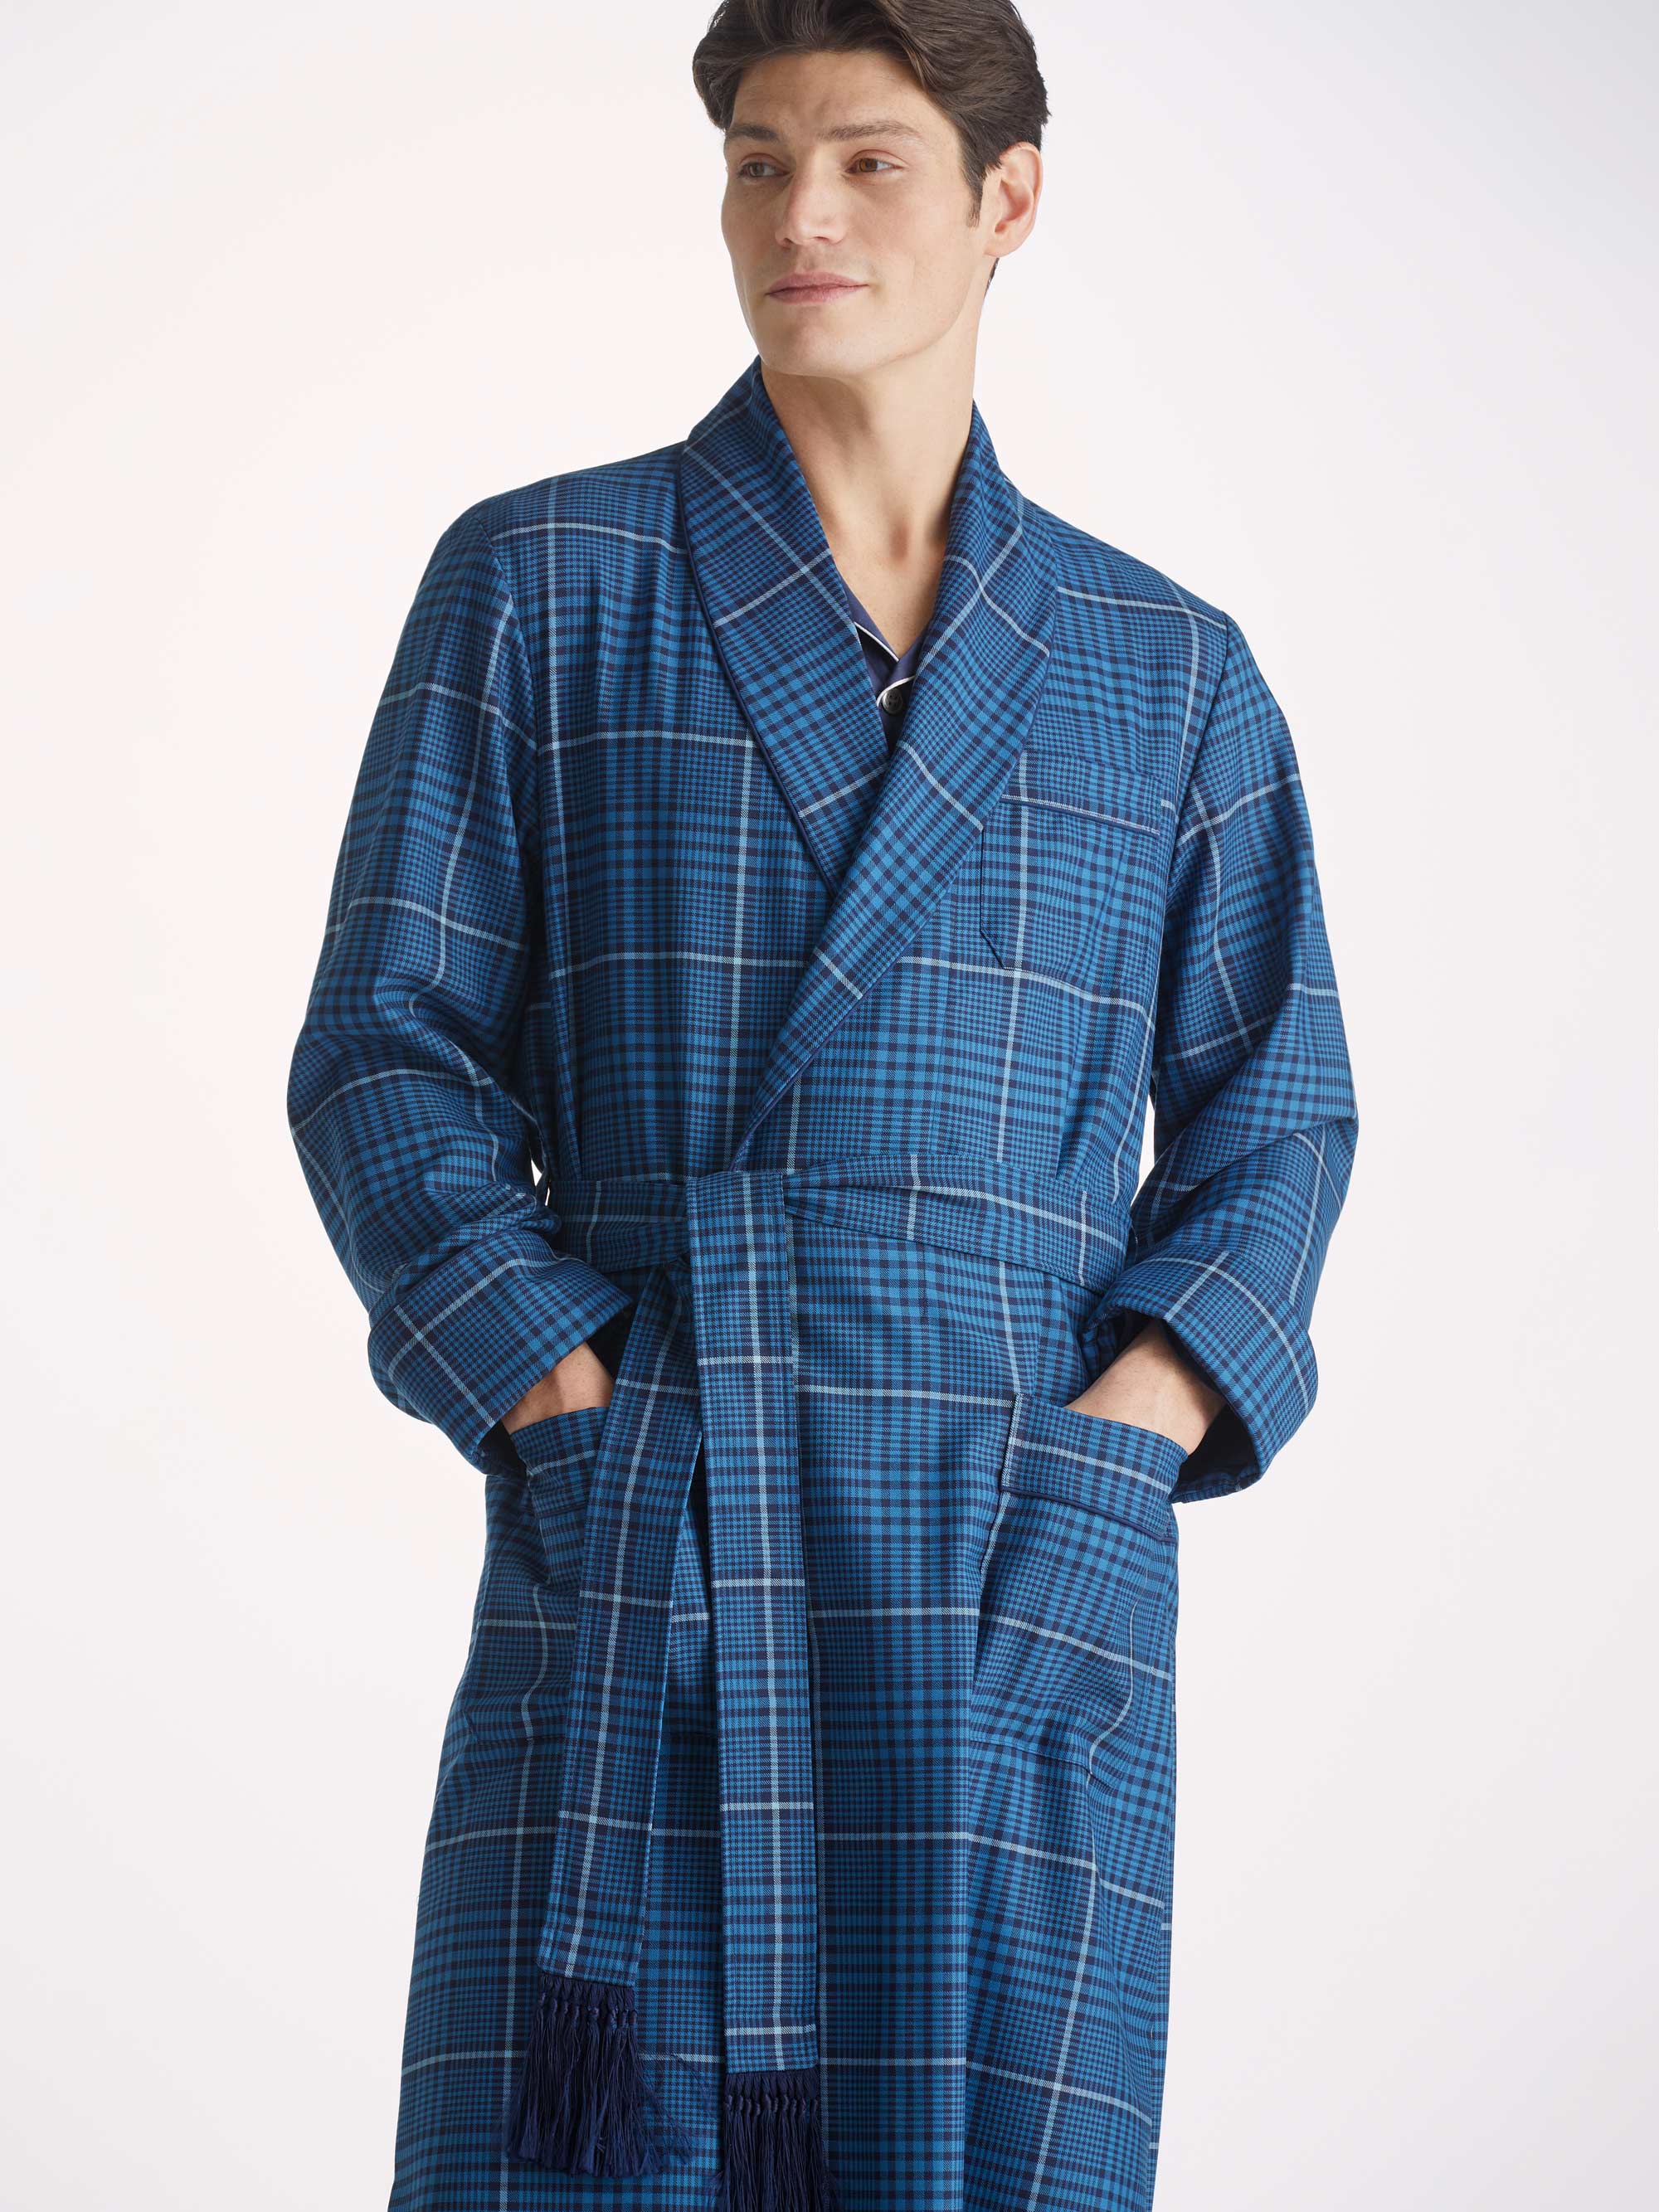 DRESSING GOWN WOMEN'S IN Wool & Cashmere Model Shawl Classic Art. Victoria  £135.41 - PicClick UK